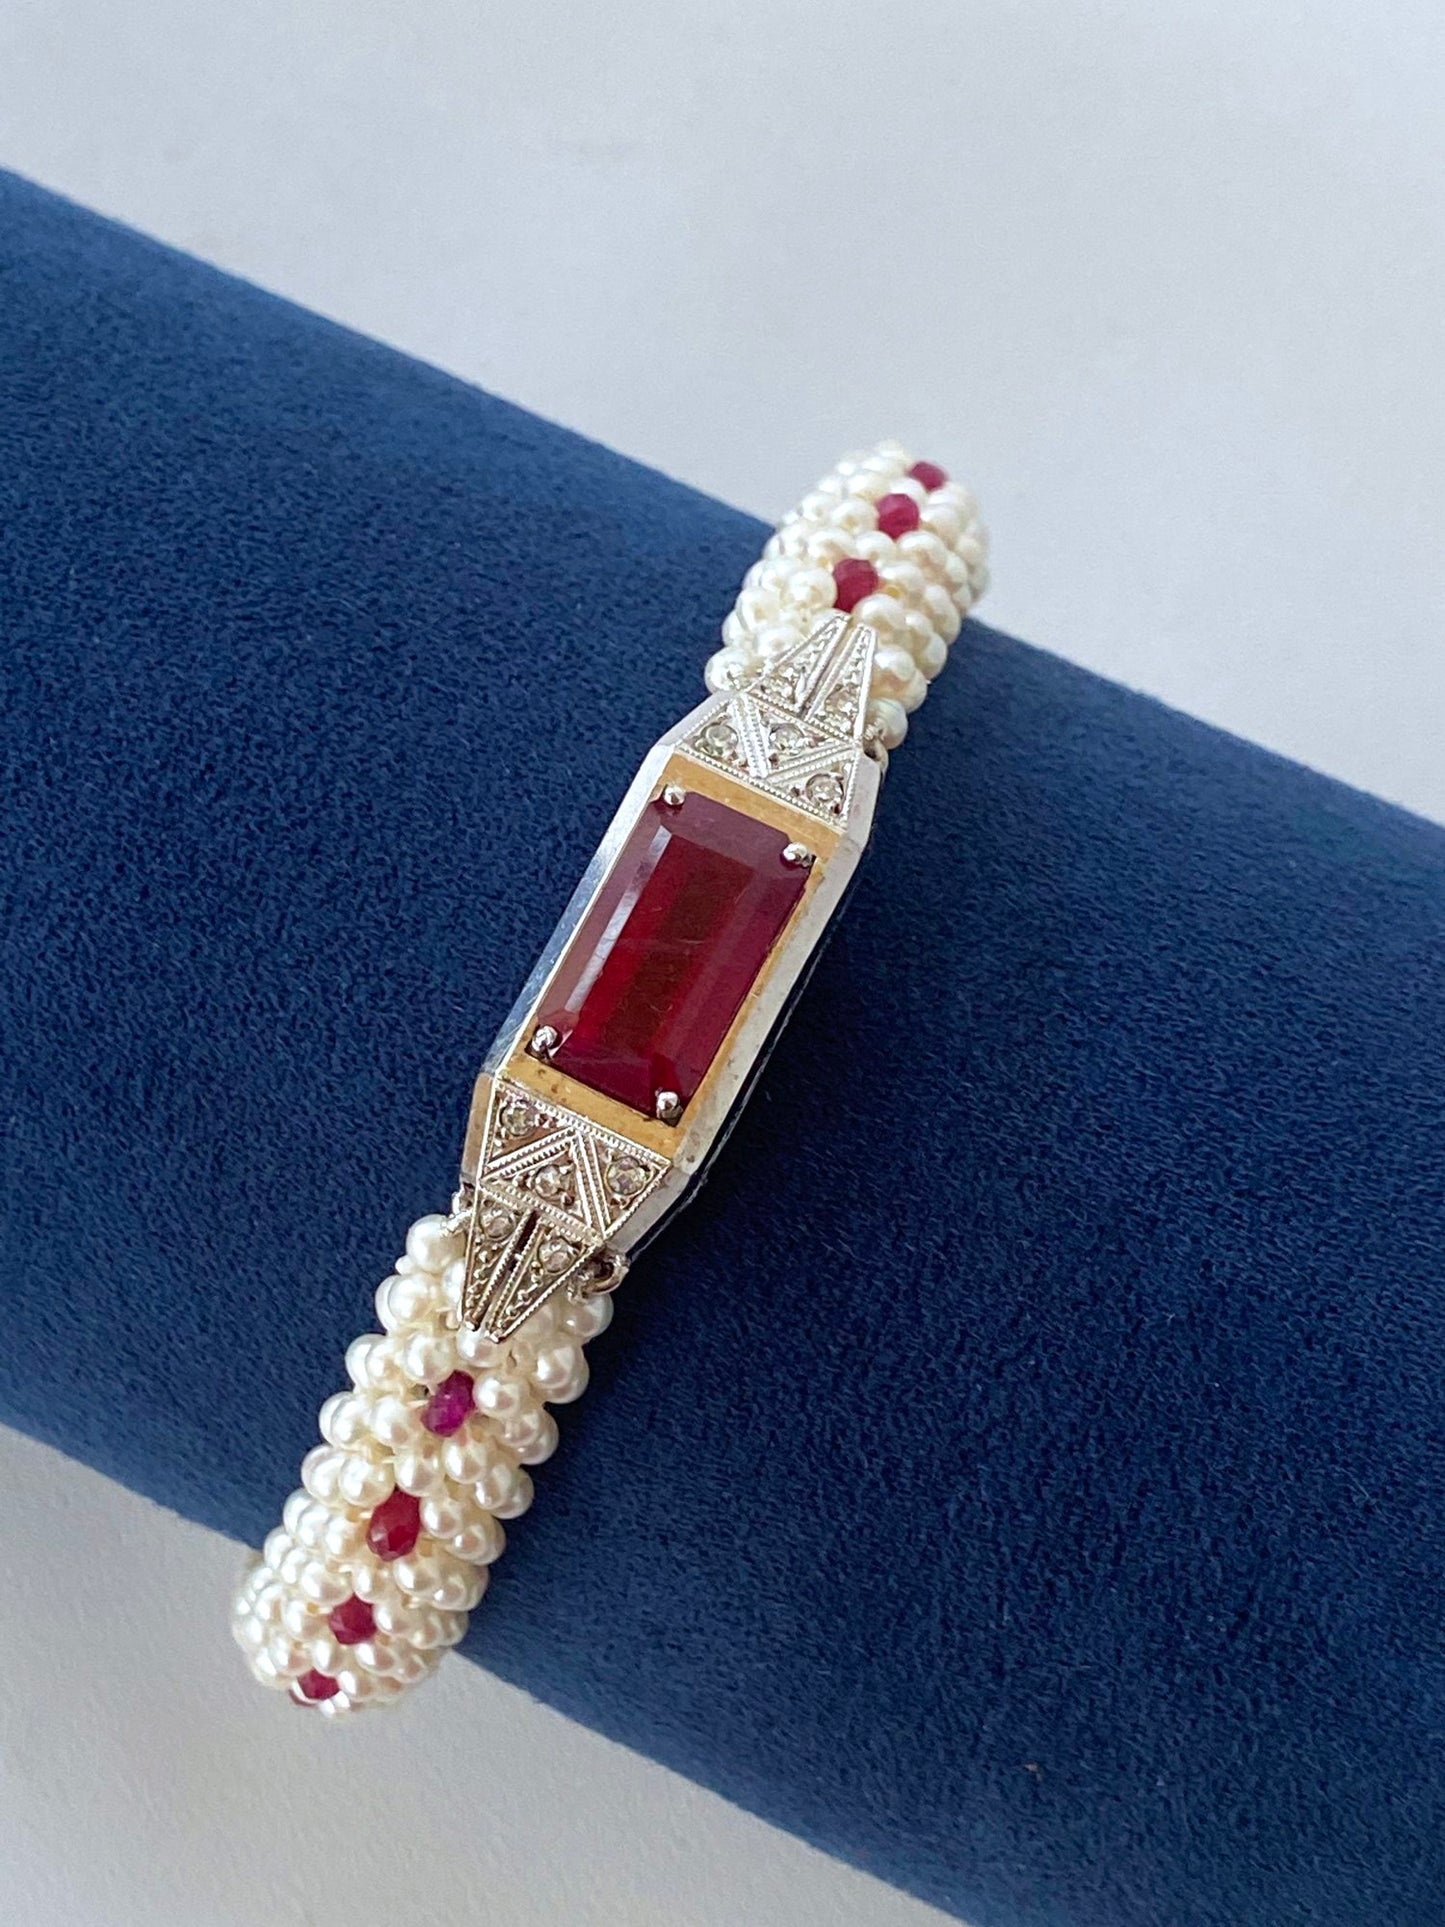 Ruby, Diamond & Pearl Bracelet with Antique 14k White Gold